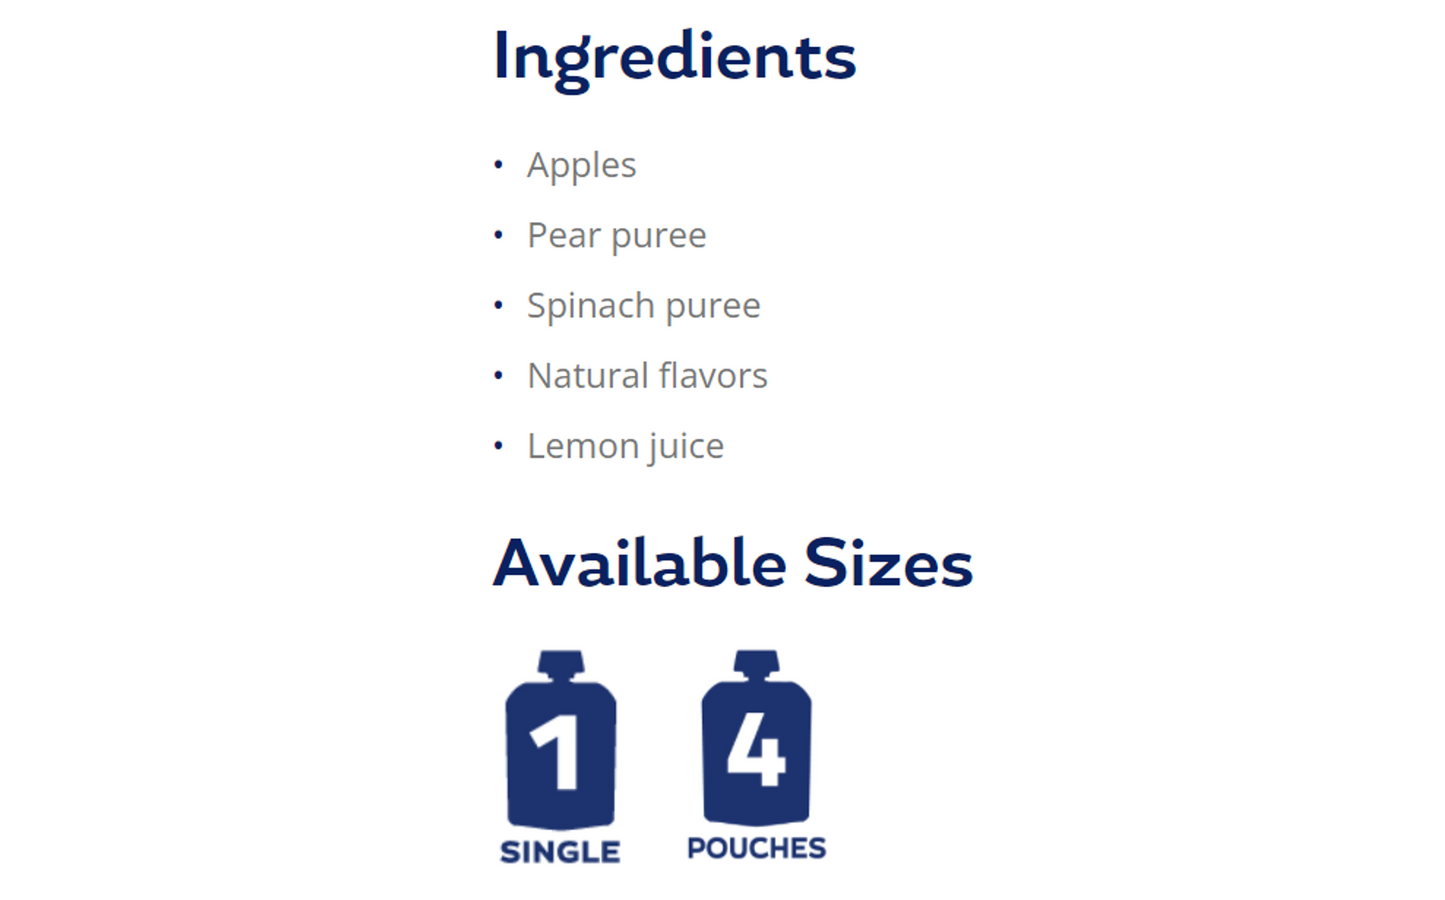 Simple ingredients and available sizes of Buddy Fruits Pear, Spinach & Apple fruit & veggies pouch.